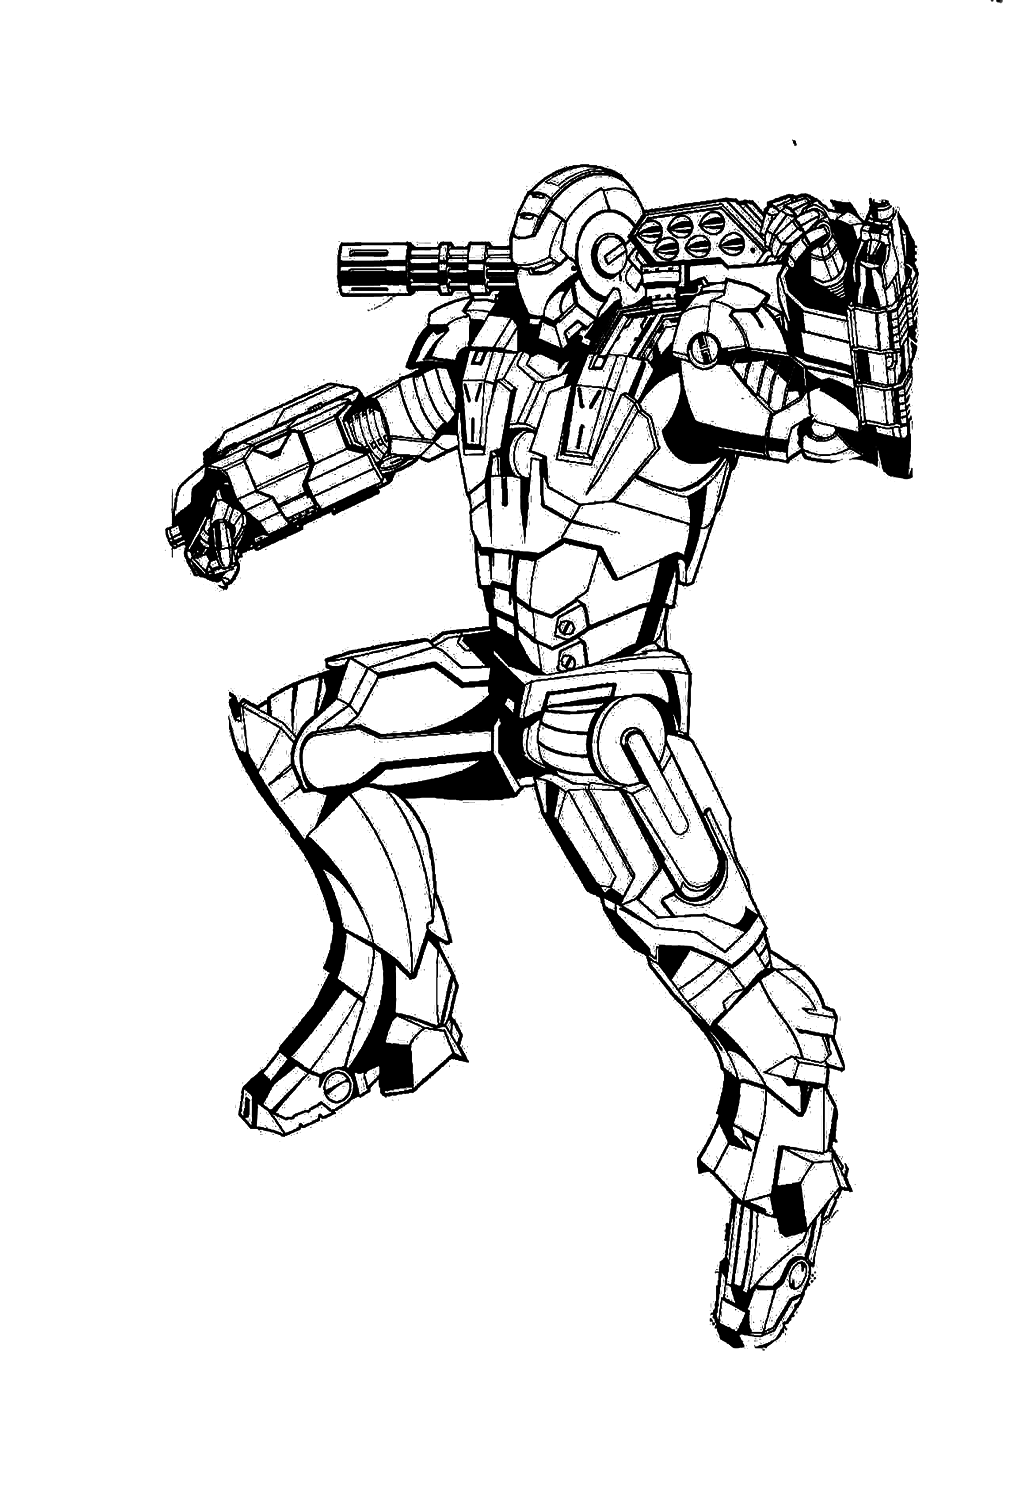 Heroes Iron Man Coloring Pages - Avengers Coloring Pages - Coloring ...